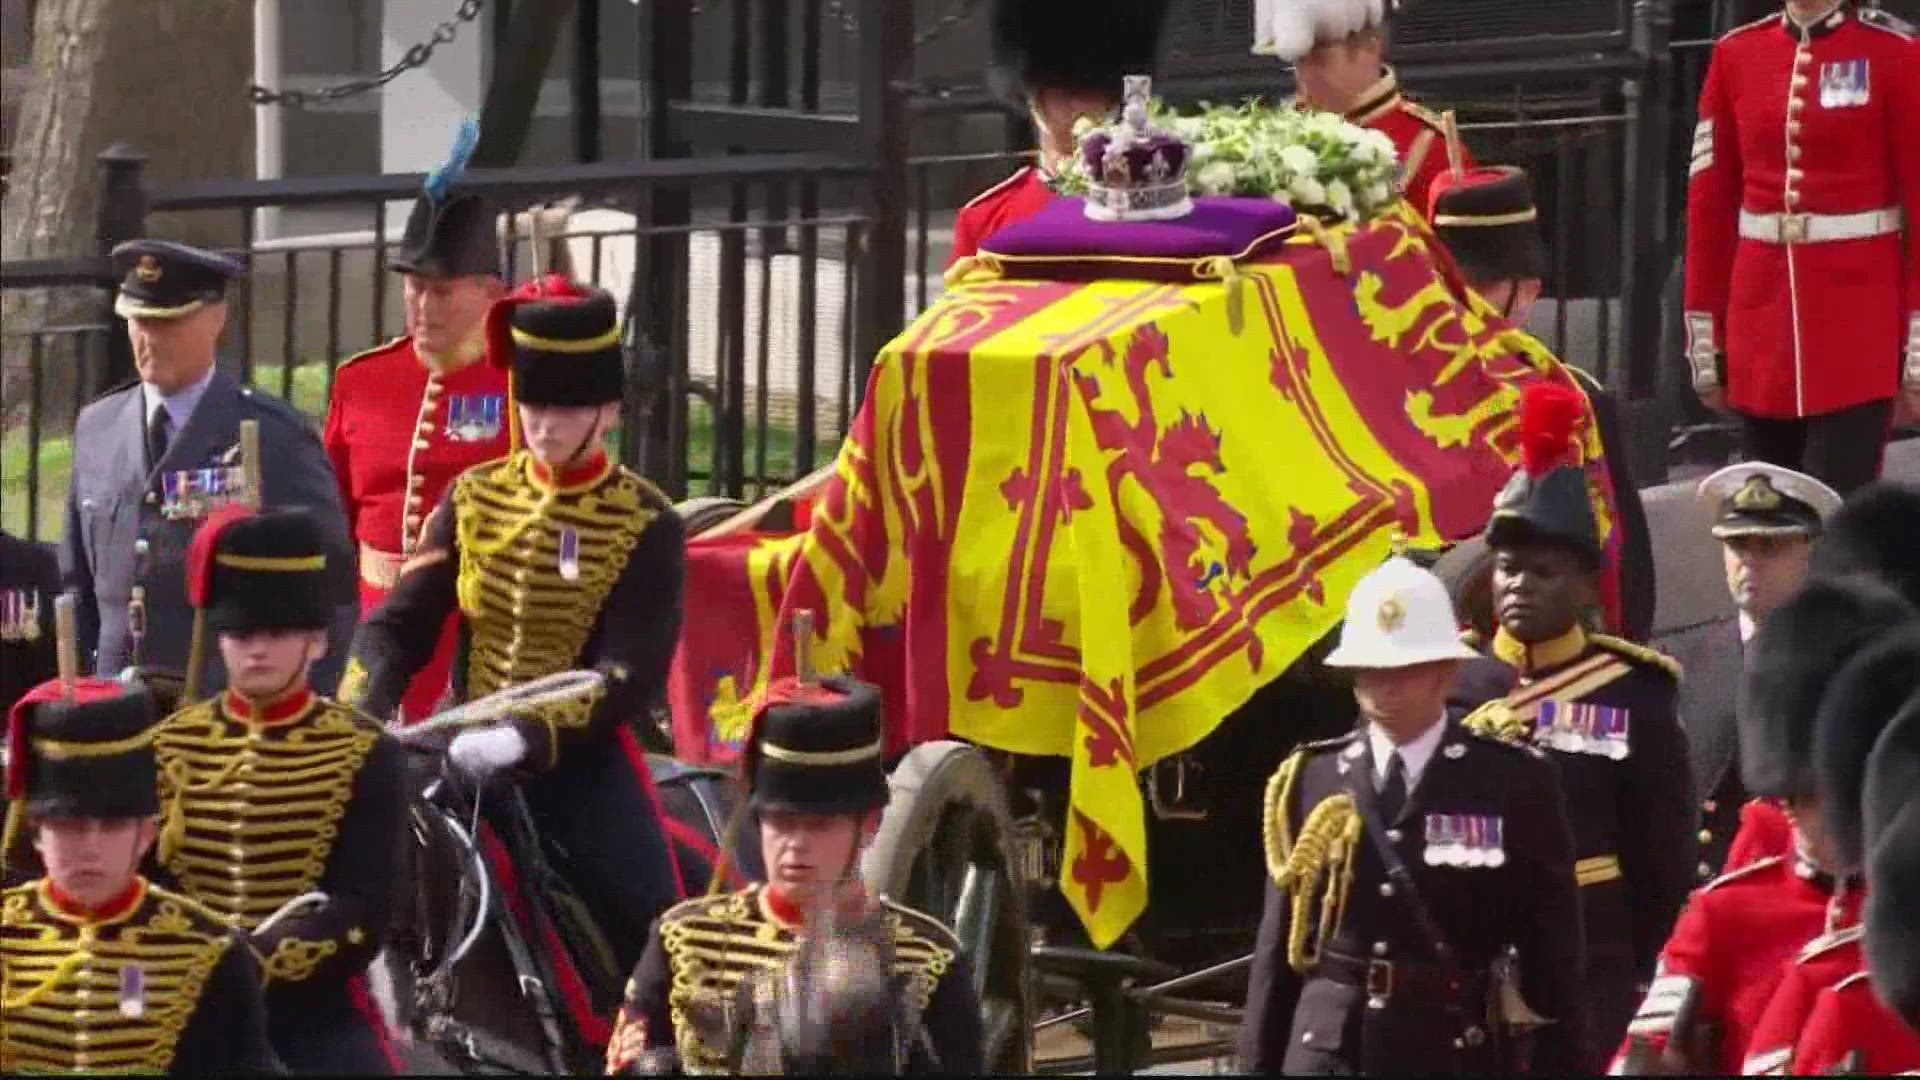 Much of the UK paused for a once in a lifetime moment. Saying goodbye to Queen Elizabeth II. Her casket made its  final journey to Buckingham Palace